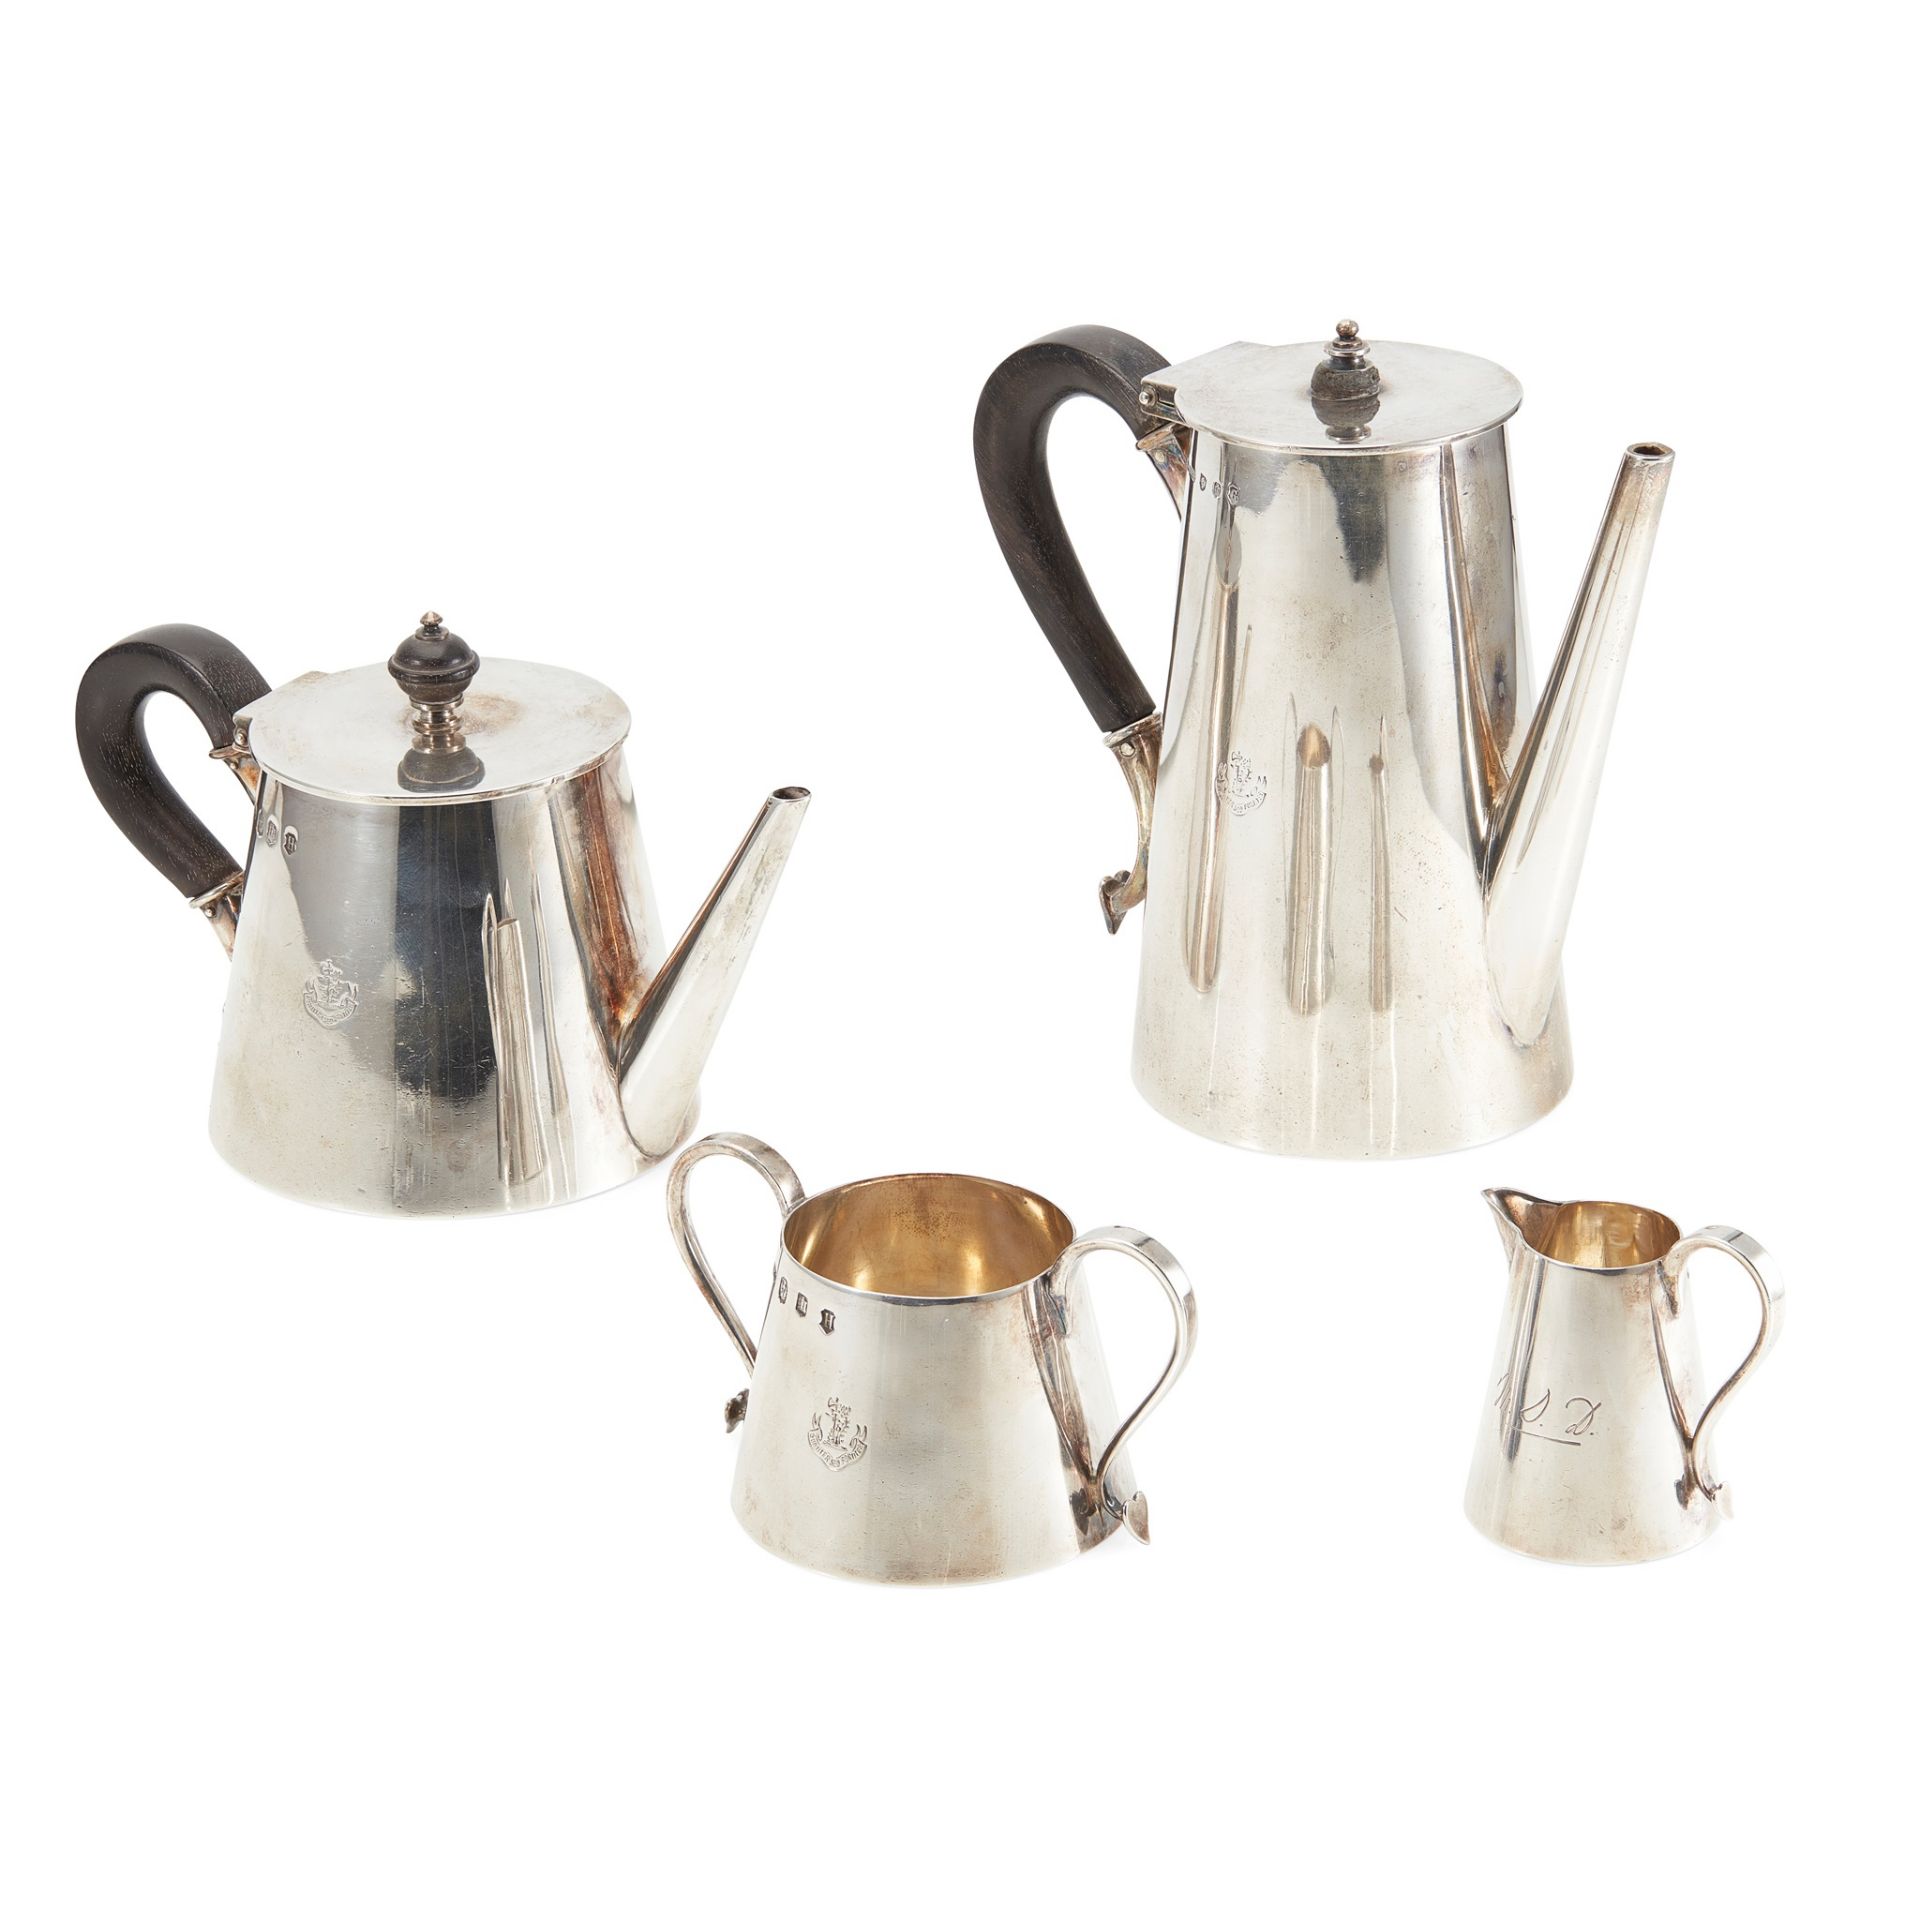 BALLATER – A RARE SCOTTISH PROVINCIAL FOUR PIECE BACHELOR'S TEA AND COFFEE SERVICE WILLIAM ROBB